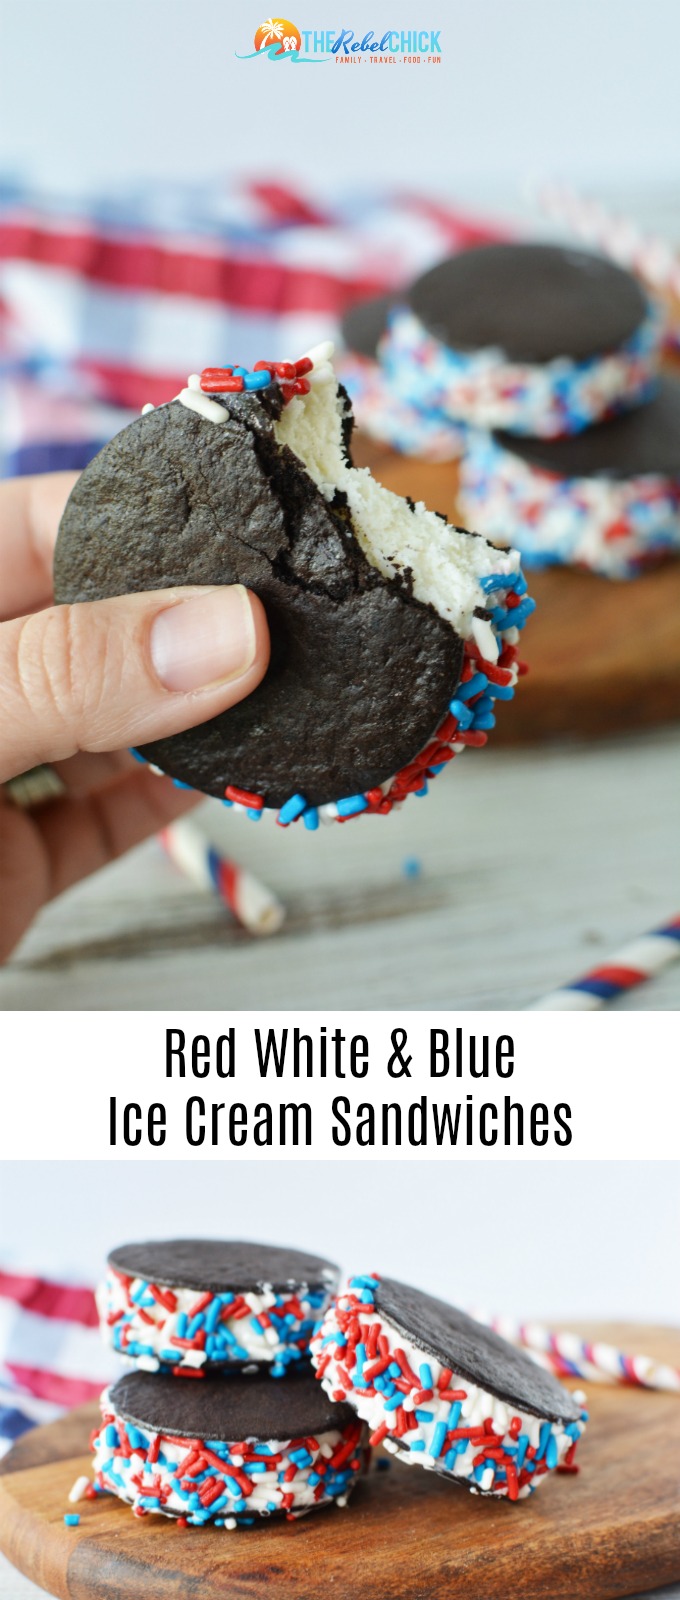 Red White & Blue Ice Cream Sandwiches Recipe for 4th of July